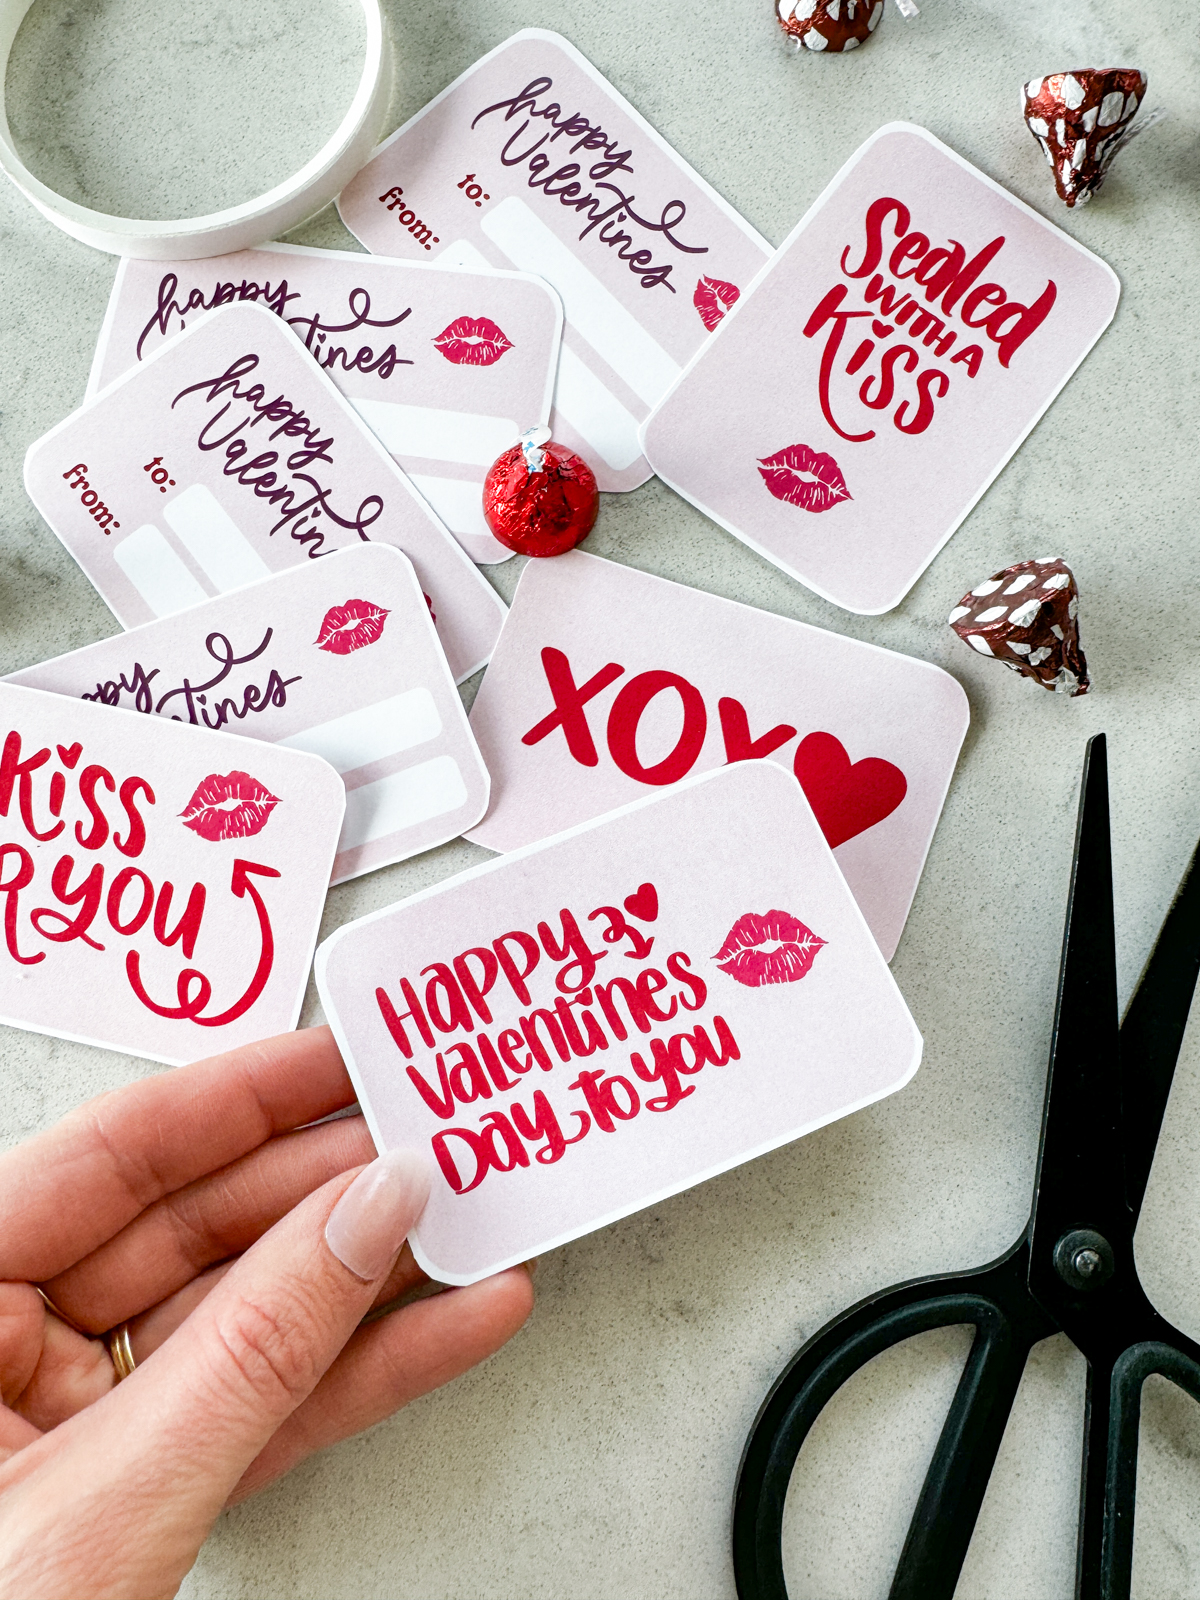 image of printable valentine cards being cut to size, valentines cards read: a kiss for you, xoxo, happy valentines day to you, sealed with a kiss